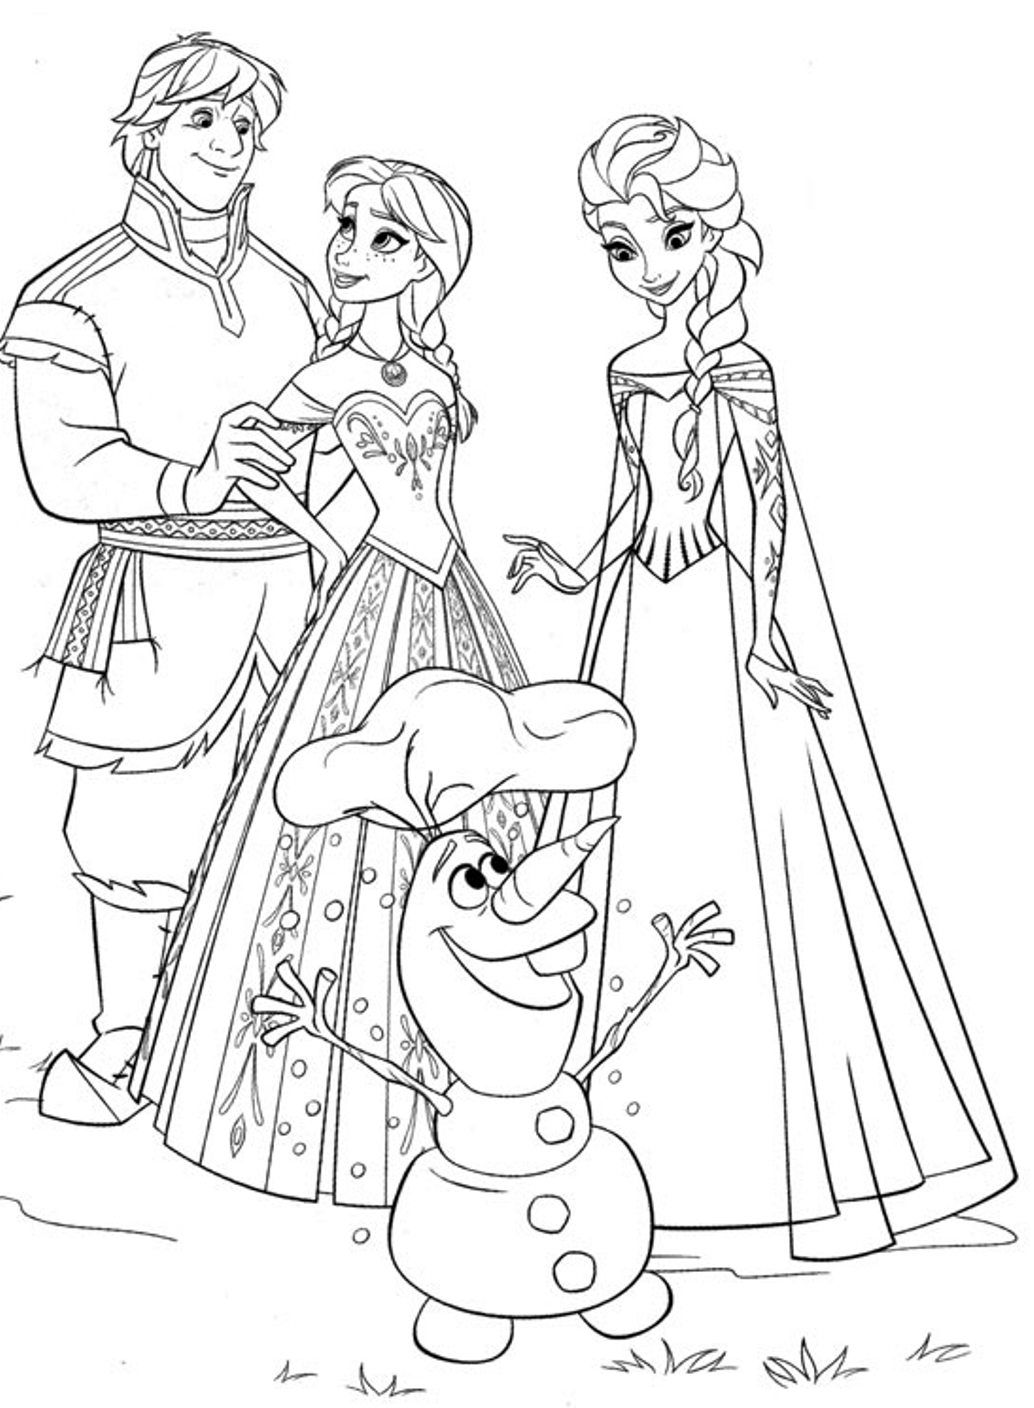 Frozen Elsa Coloring Page | Cartoon Coloring pages of ...